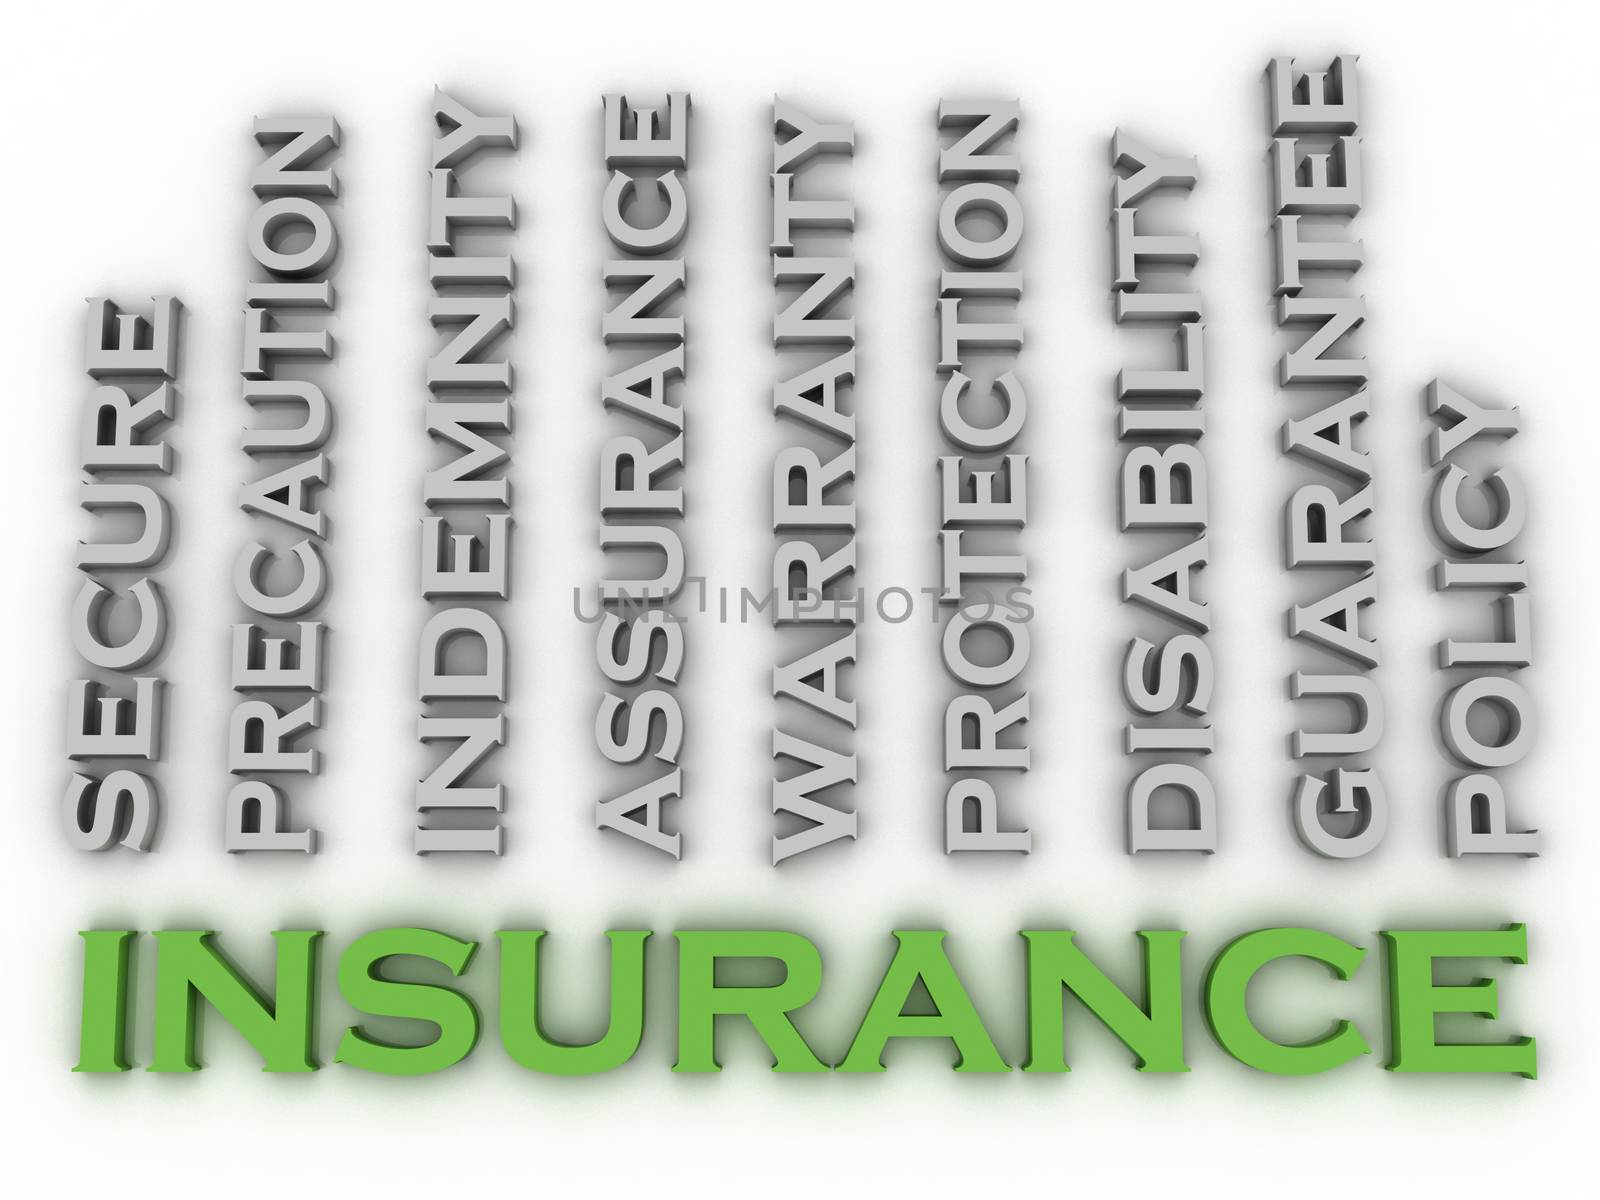 3d image Insurance issues concept word cloud background by dacasdo